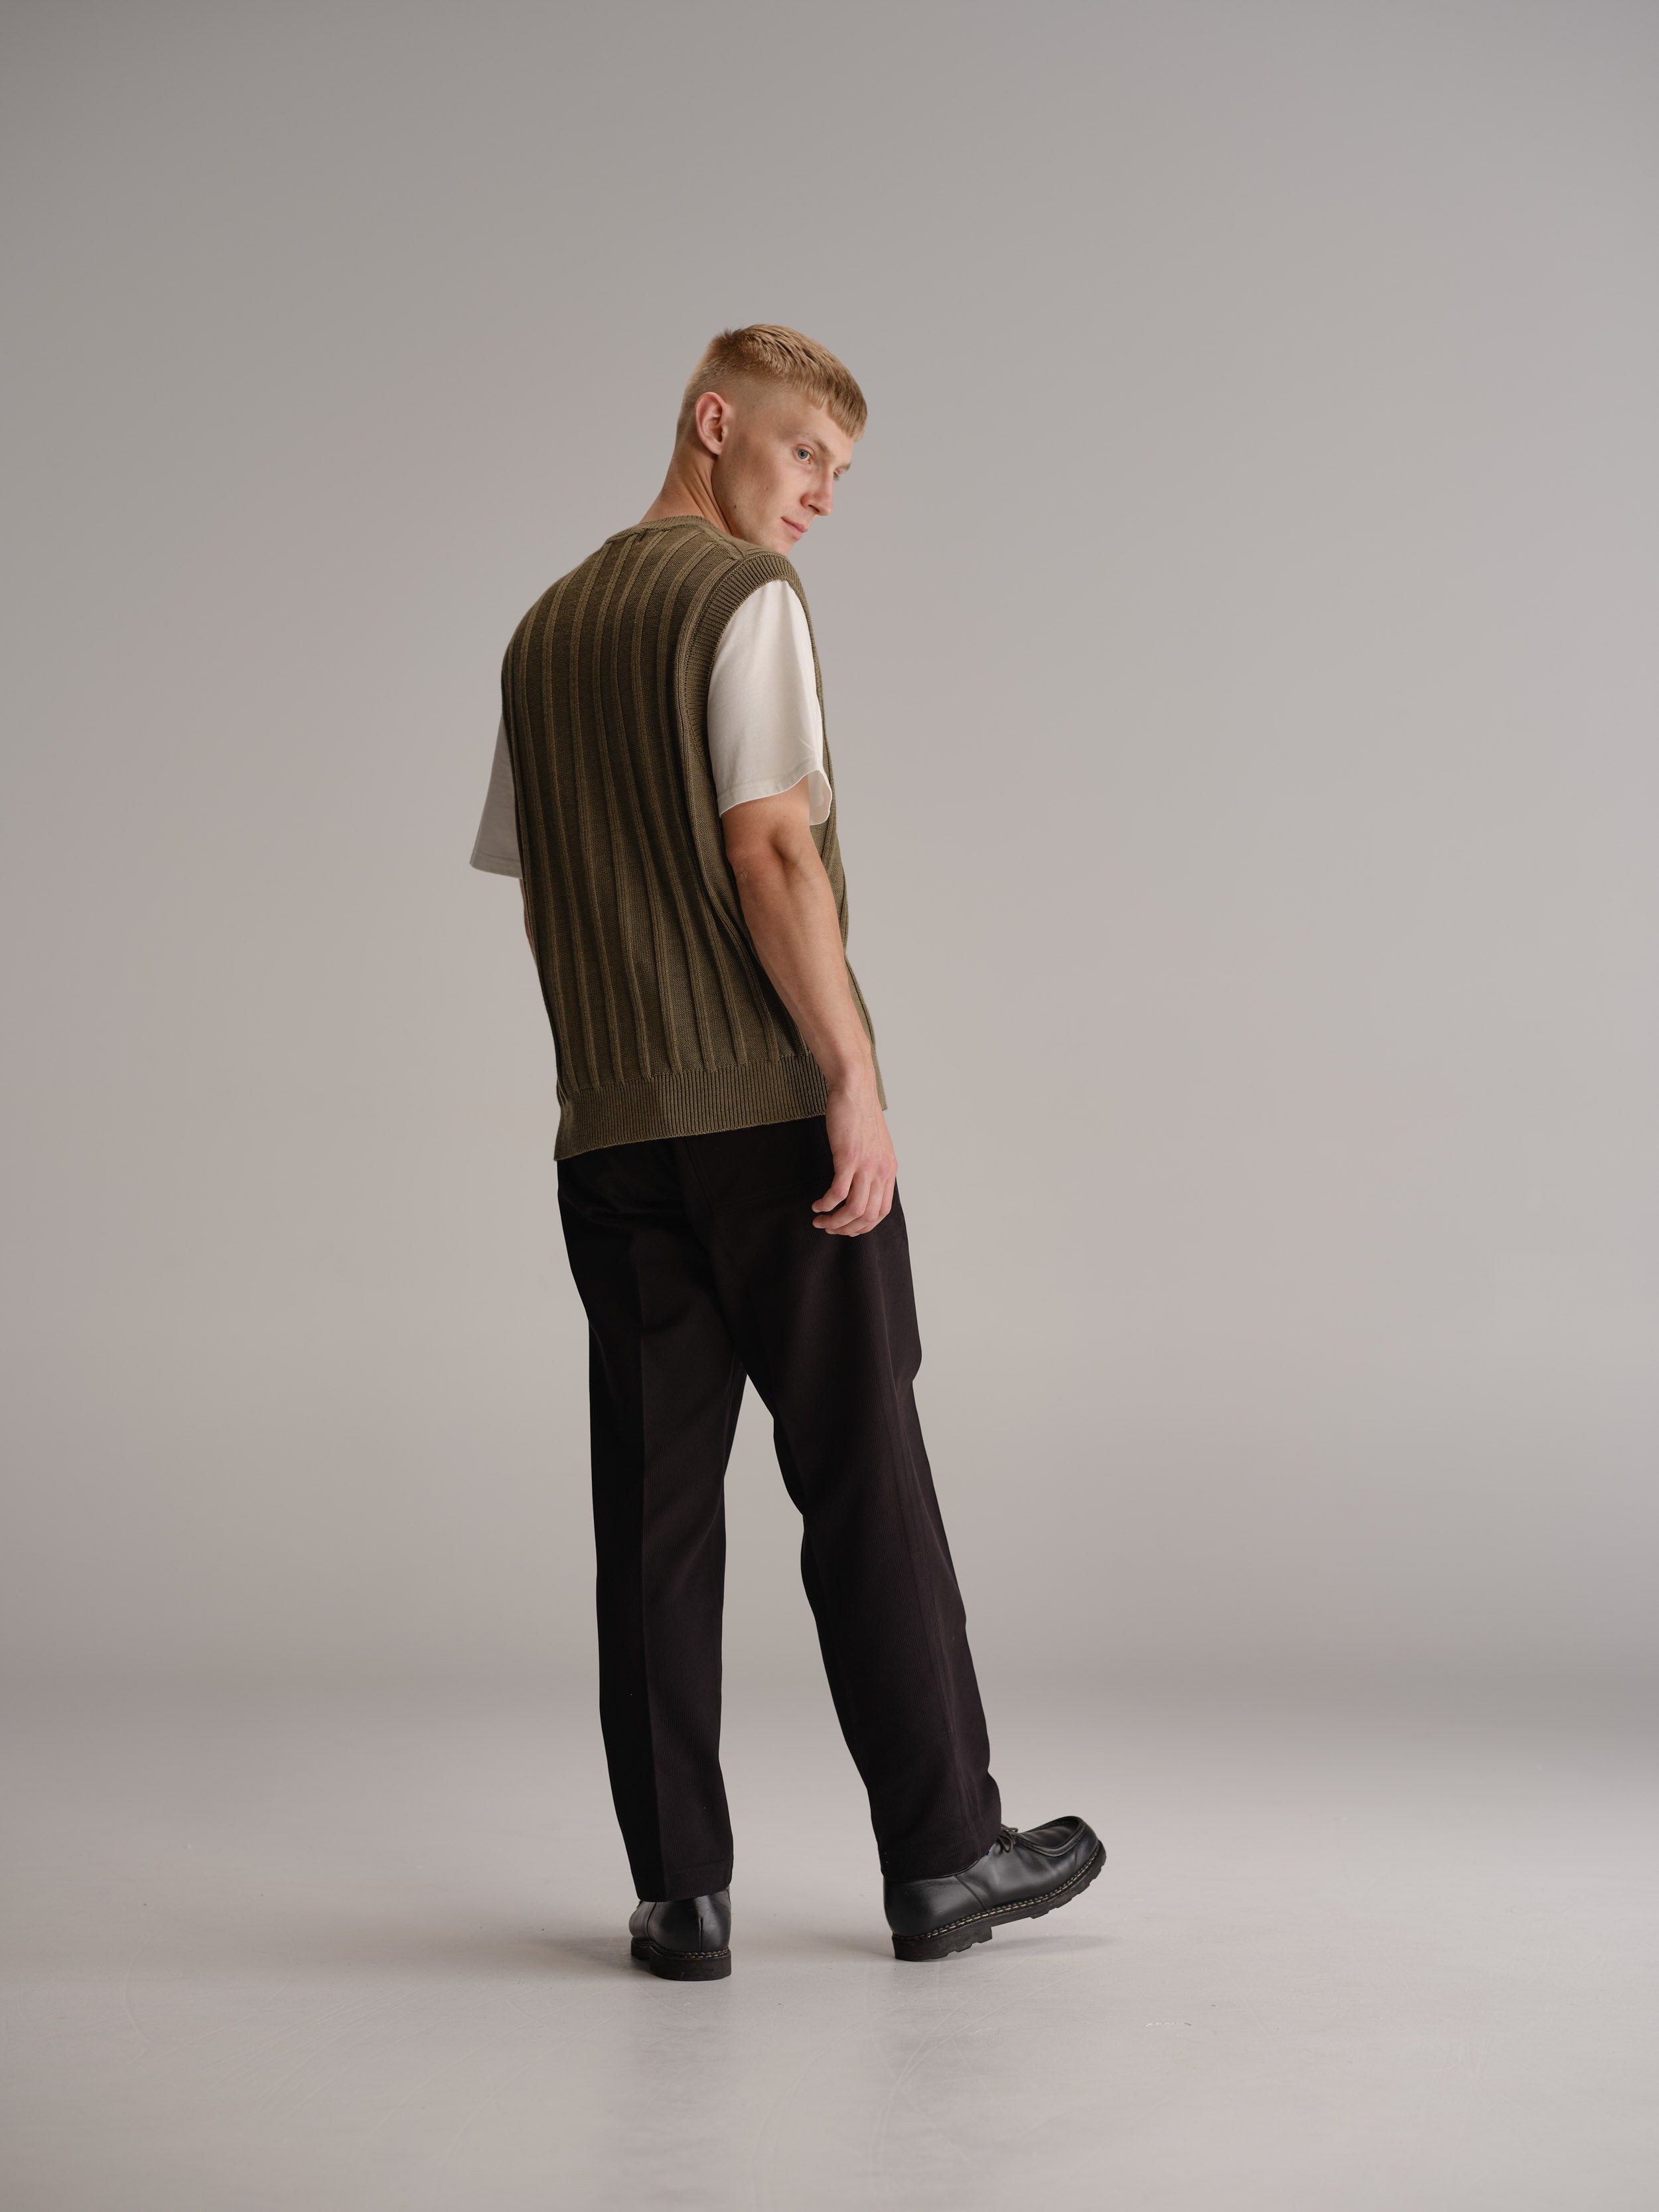 Back view of man standing in white studio wearing sage vest over a white t-shirt, black pants and black leather shoes.